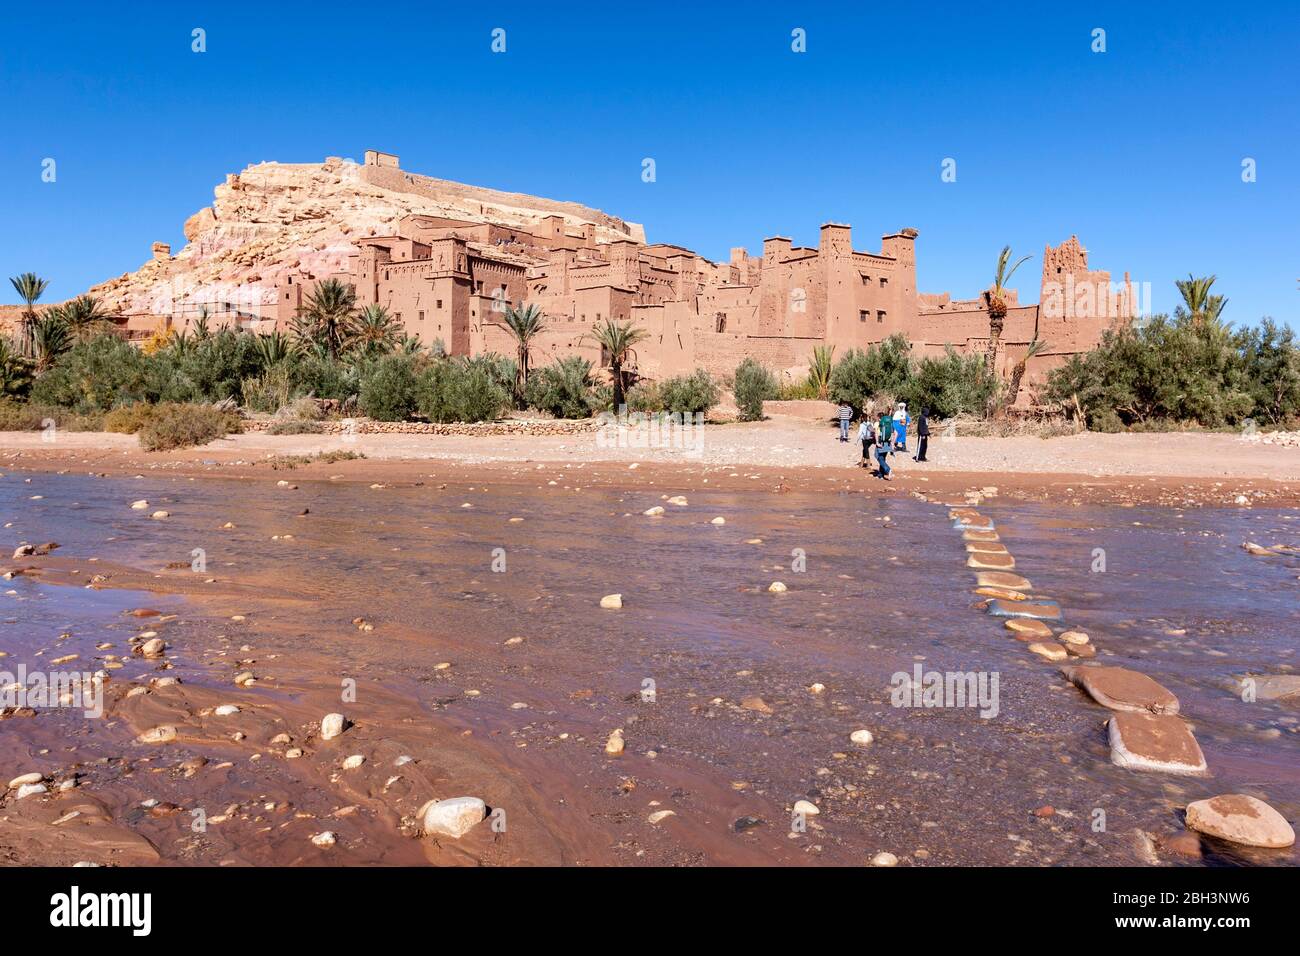 Stones as crossing point via Ounila River and the Historic ighrem or ksar (fortified village), Aït Benhaddou, Morocco Stock Photo